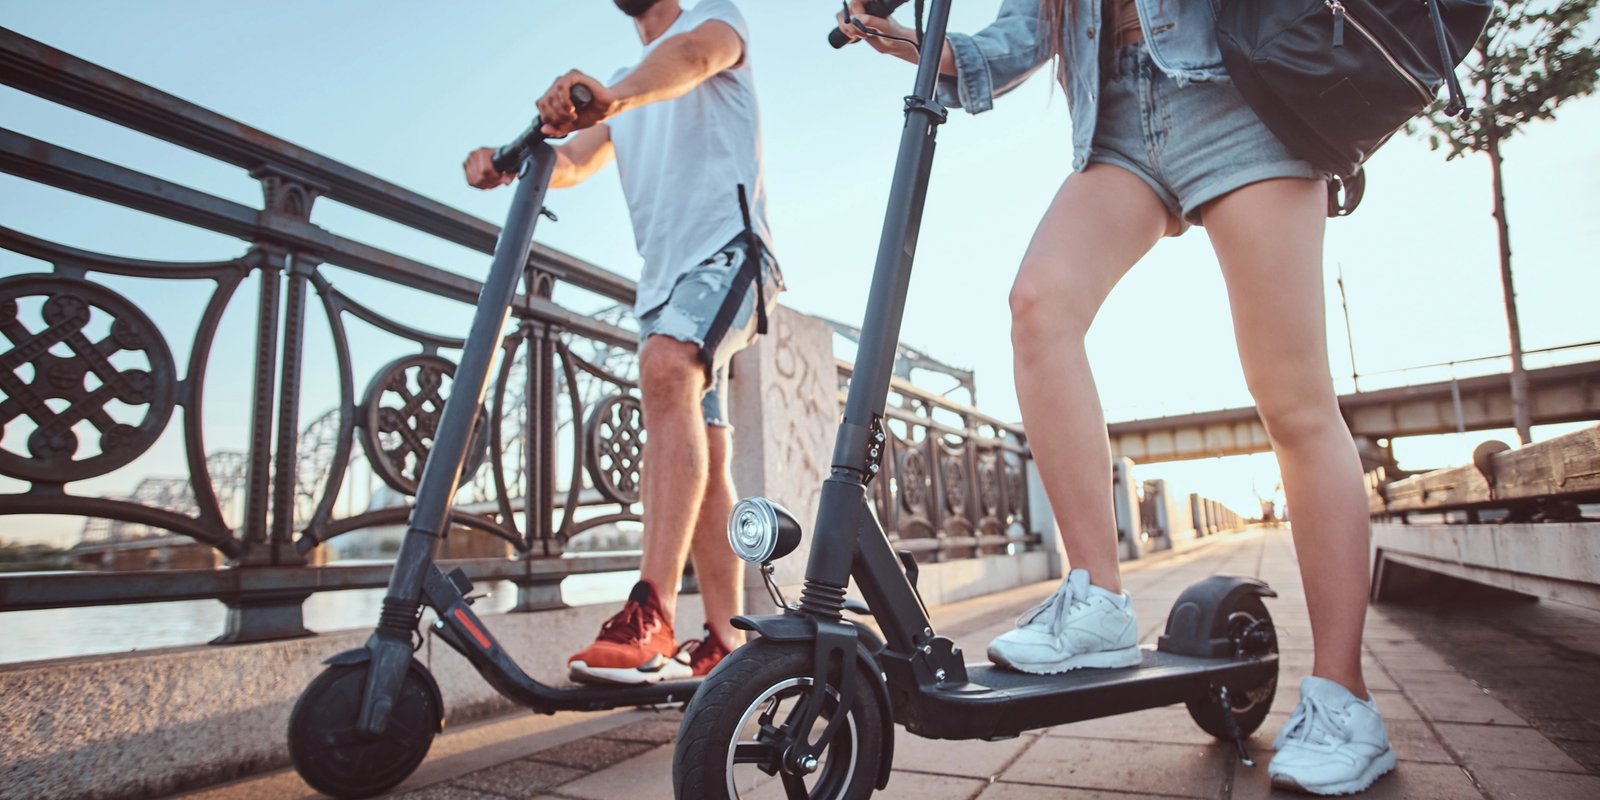 Electric scooters on the side walks: How can electric scooter tech reduce collisions?